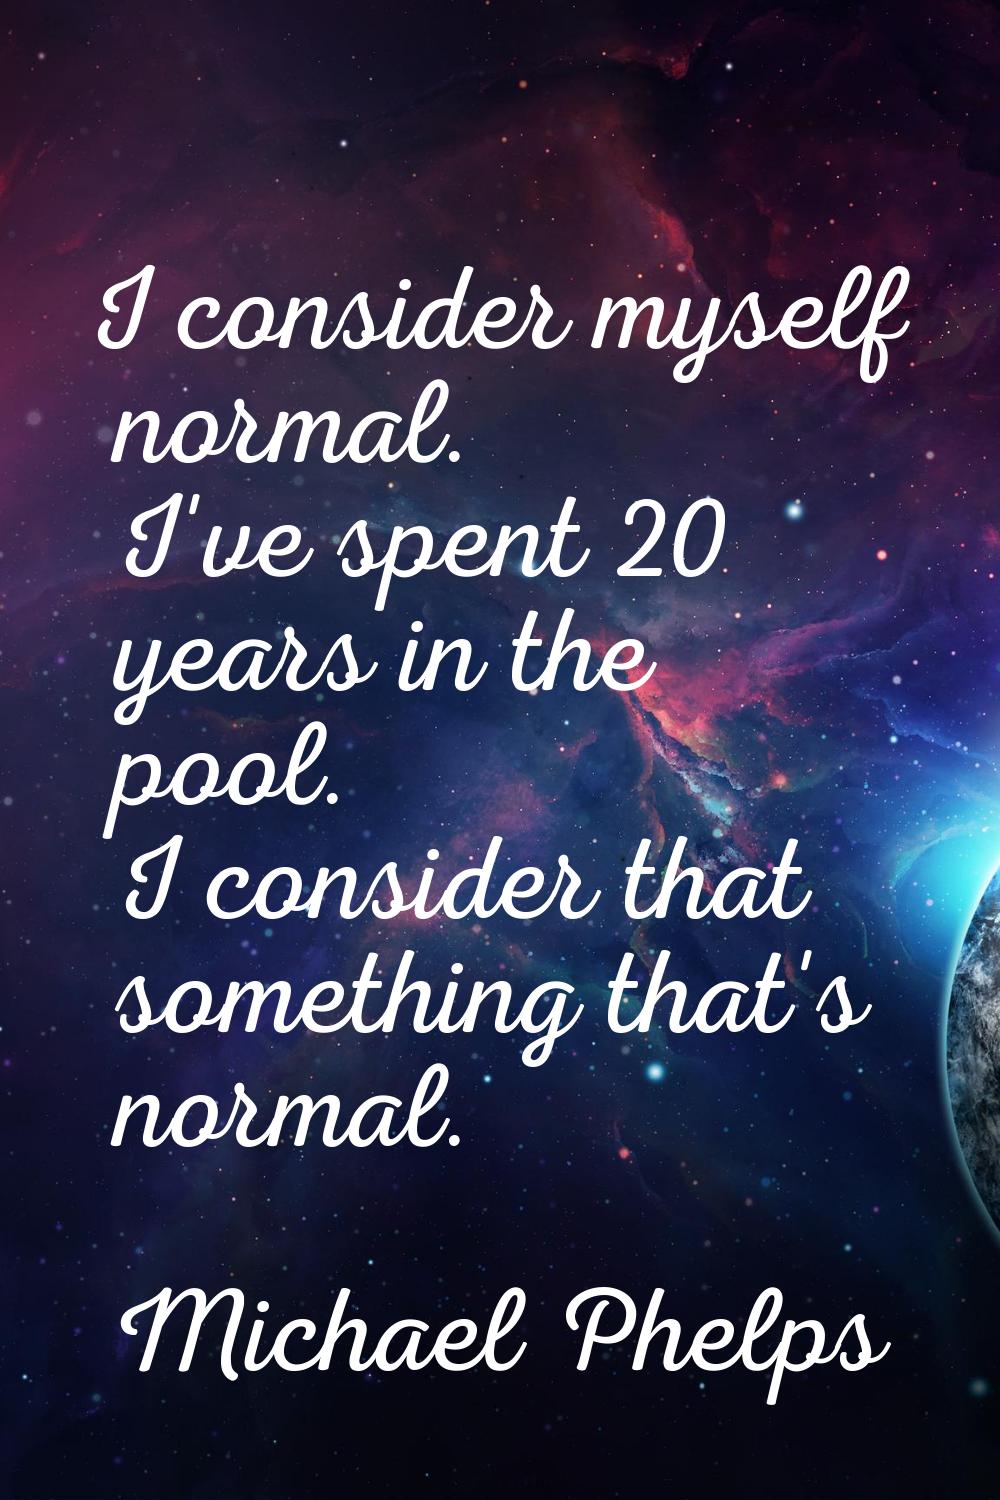 I consider myself normal. I've spent 20 years in the pool. I consider that something that's normal.